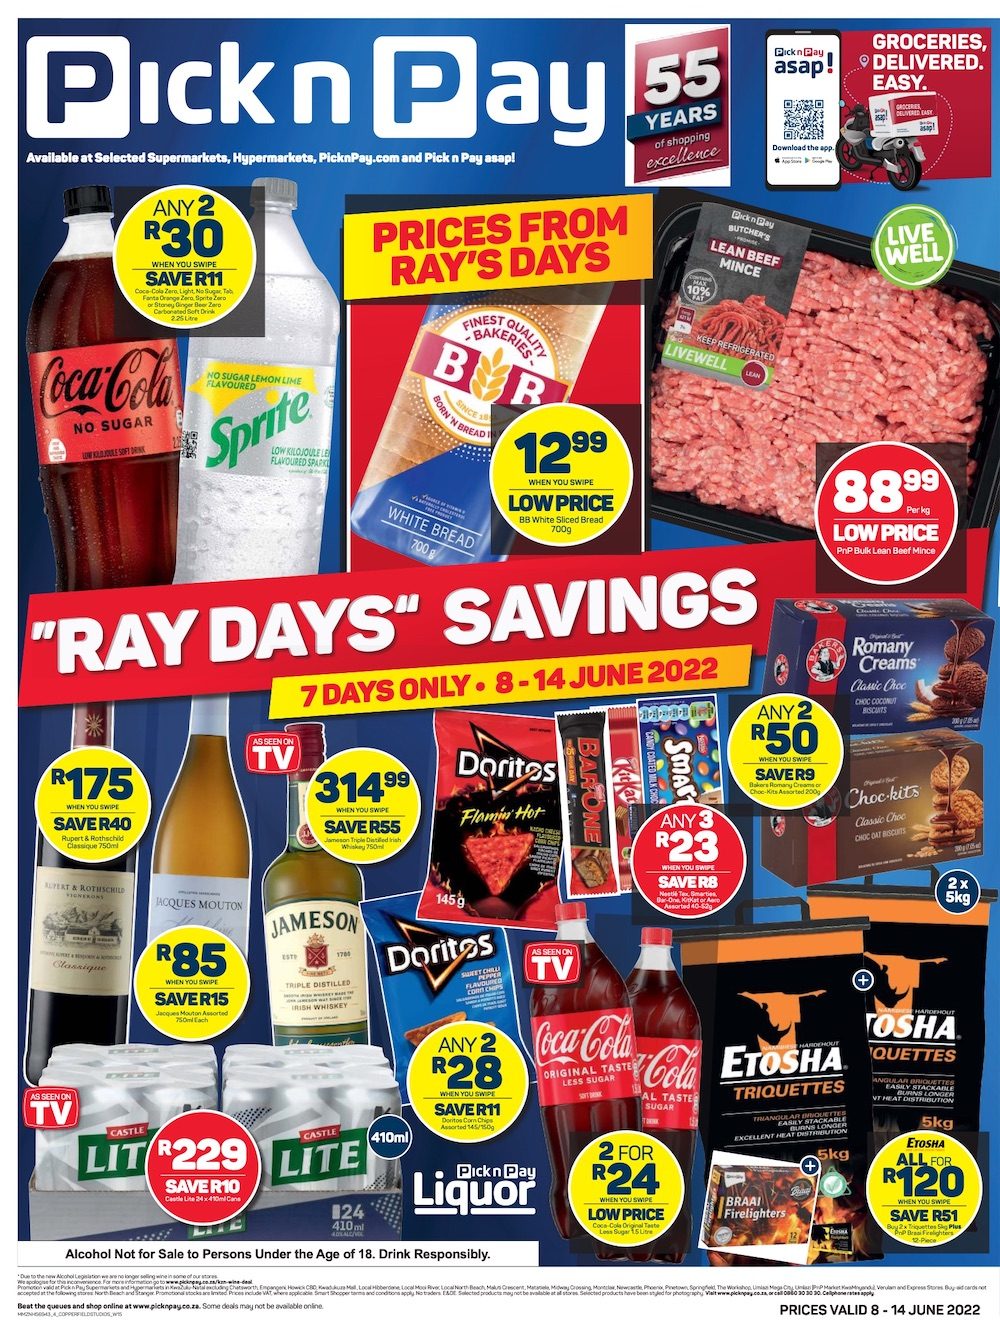 Pick n Pay Specials Ray Days 8 – 14 June 2022